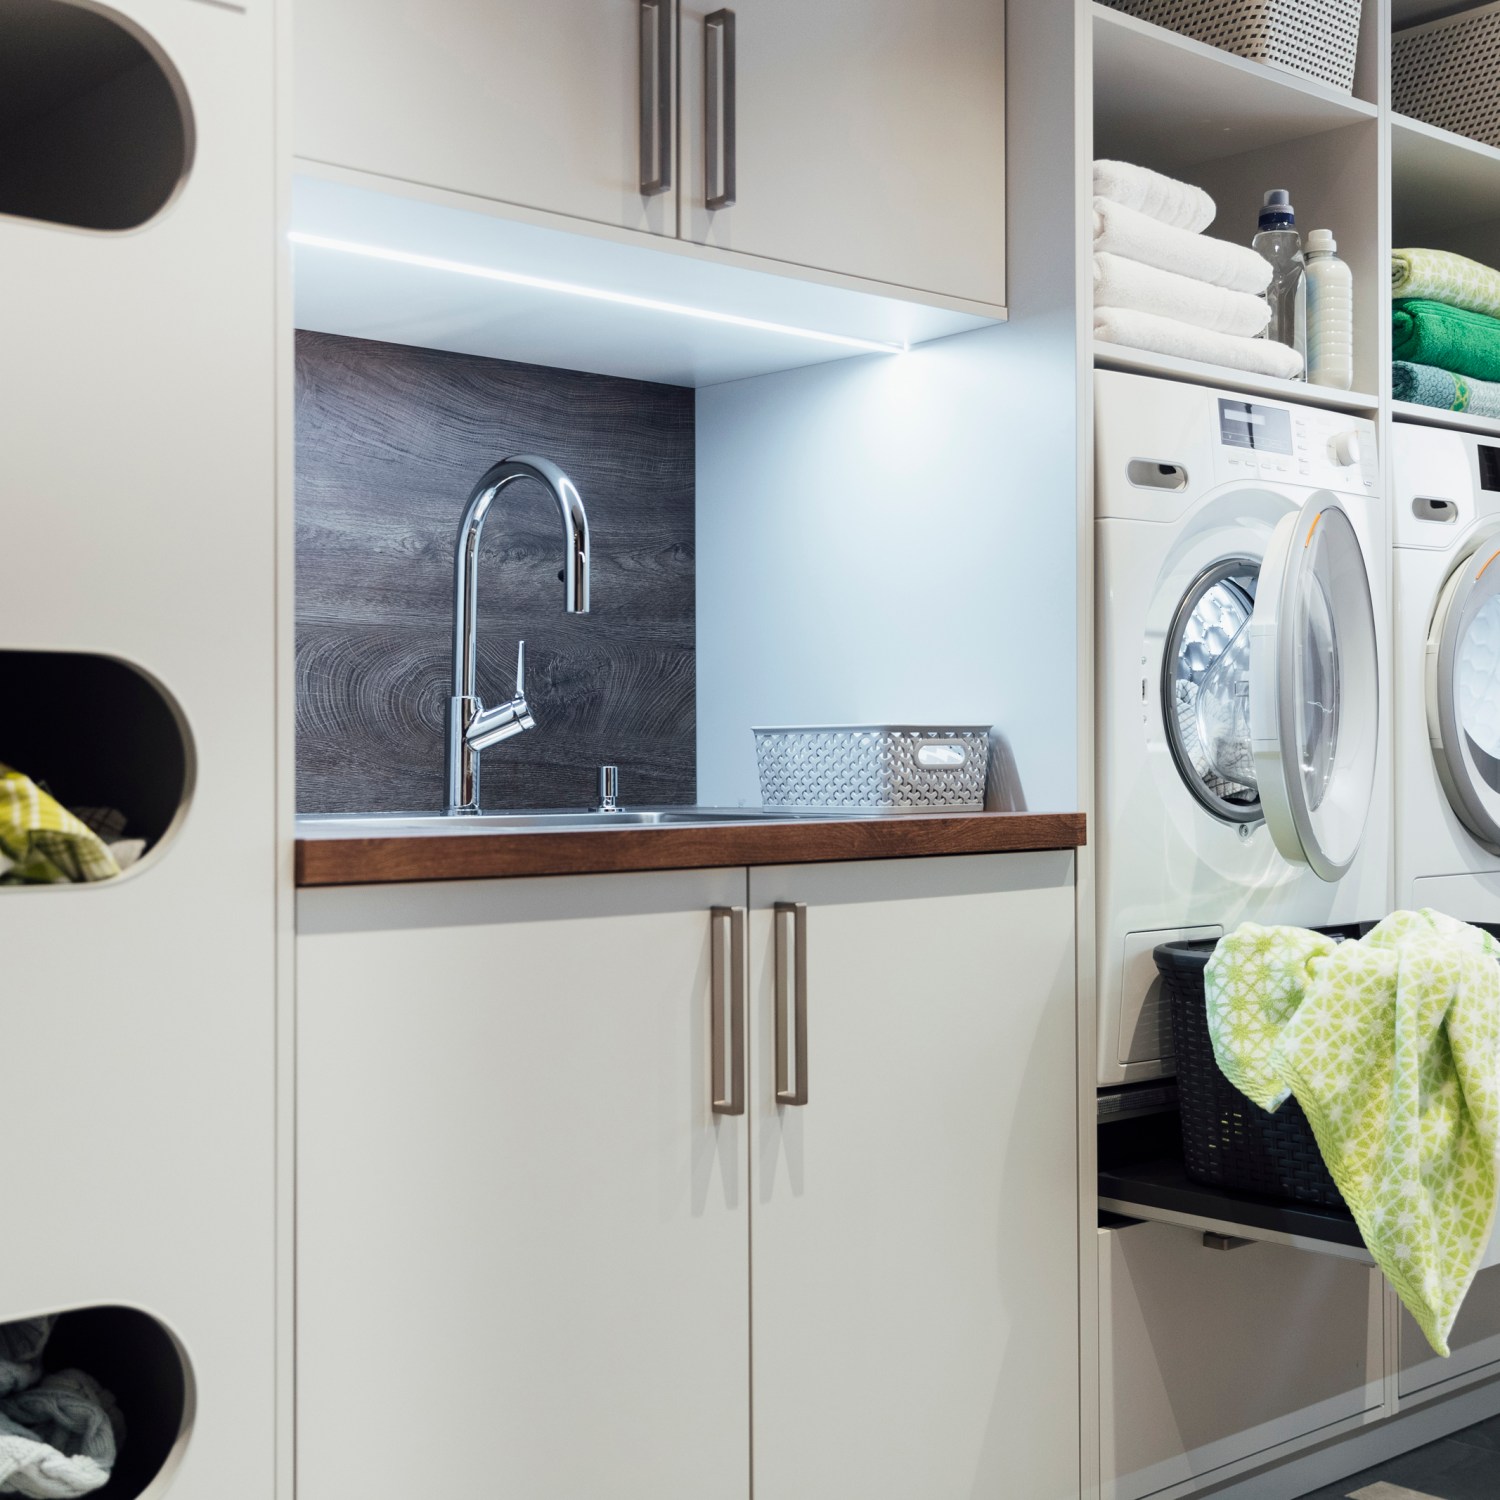 functional organized laundry room image of a modern utility area with a washing machine and dryer with lots of storage as well as a sink all integrated into the design